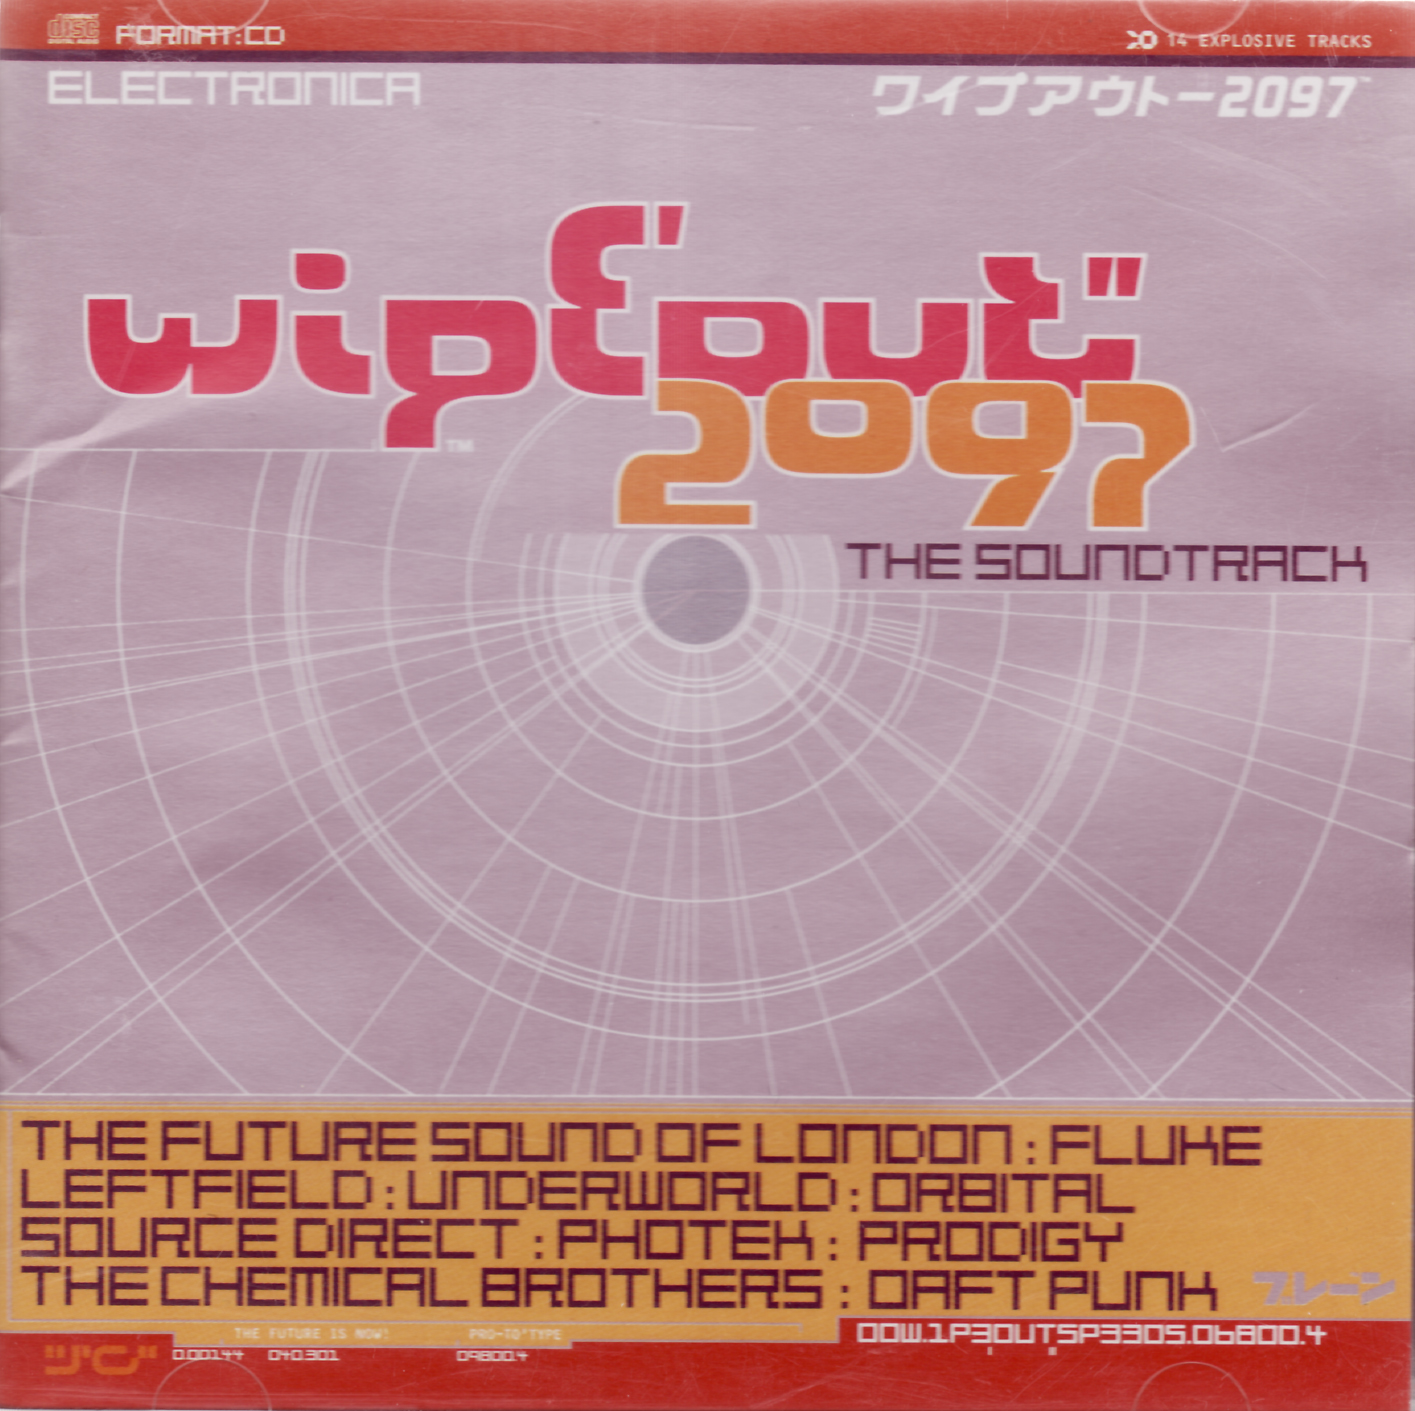 Ost 20 22. Wipeout 2097 (1996). Wipeout XL ps1. Wipeout XL Cover. Wipeout XL ps1 NTSC Japan.